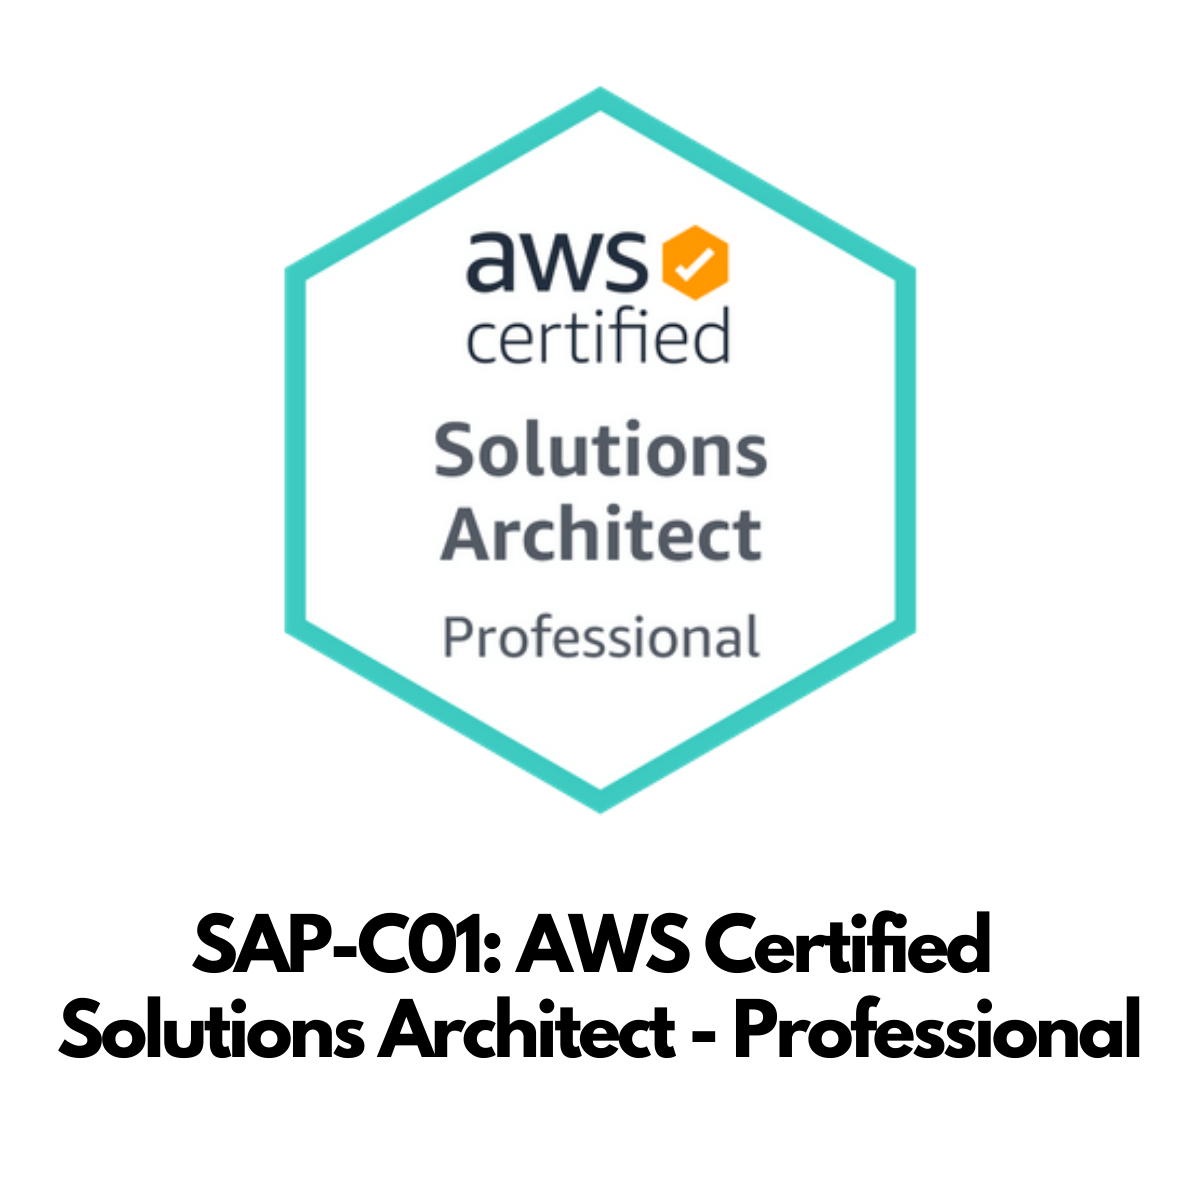 The unofficial guide to AWS Certified Solutions Architect Professional